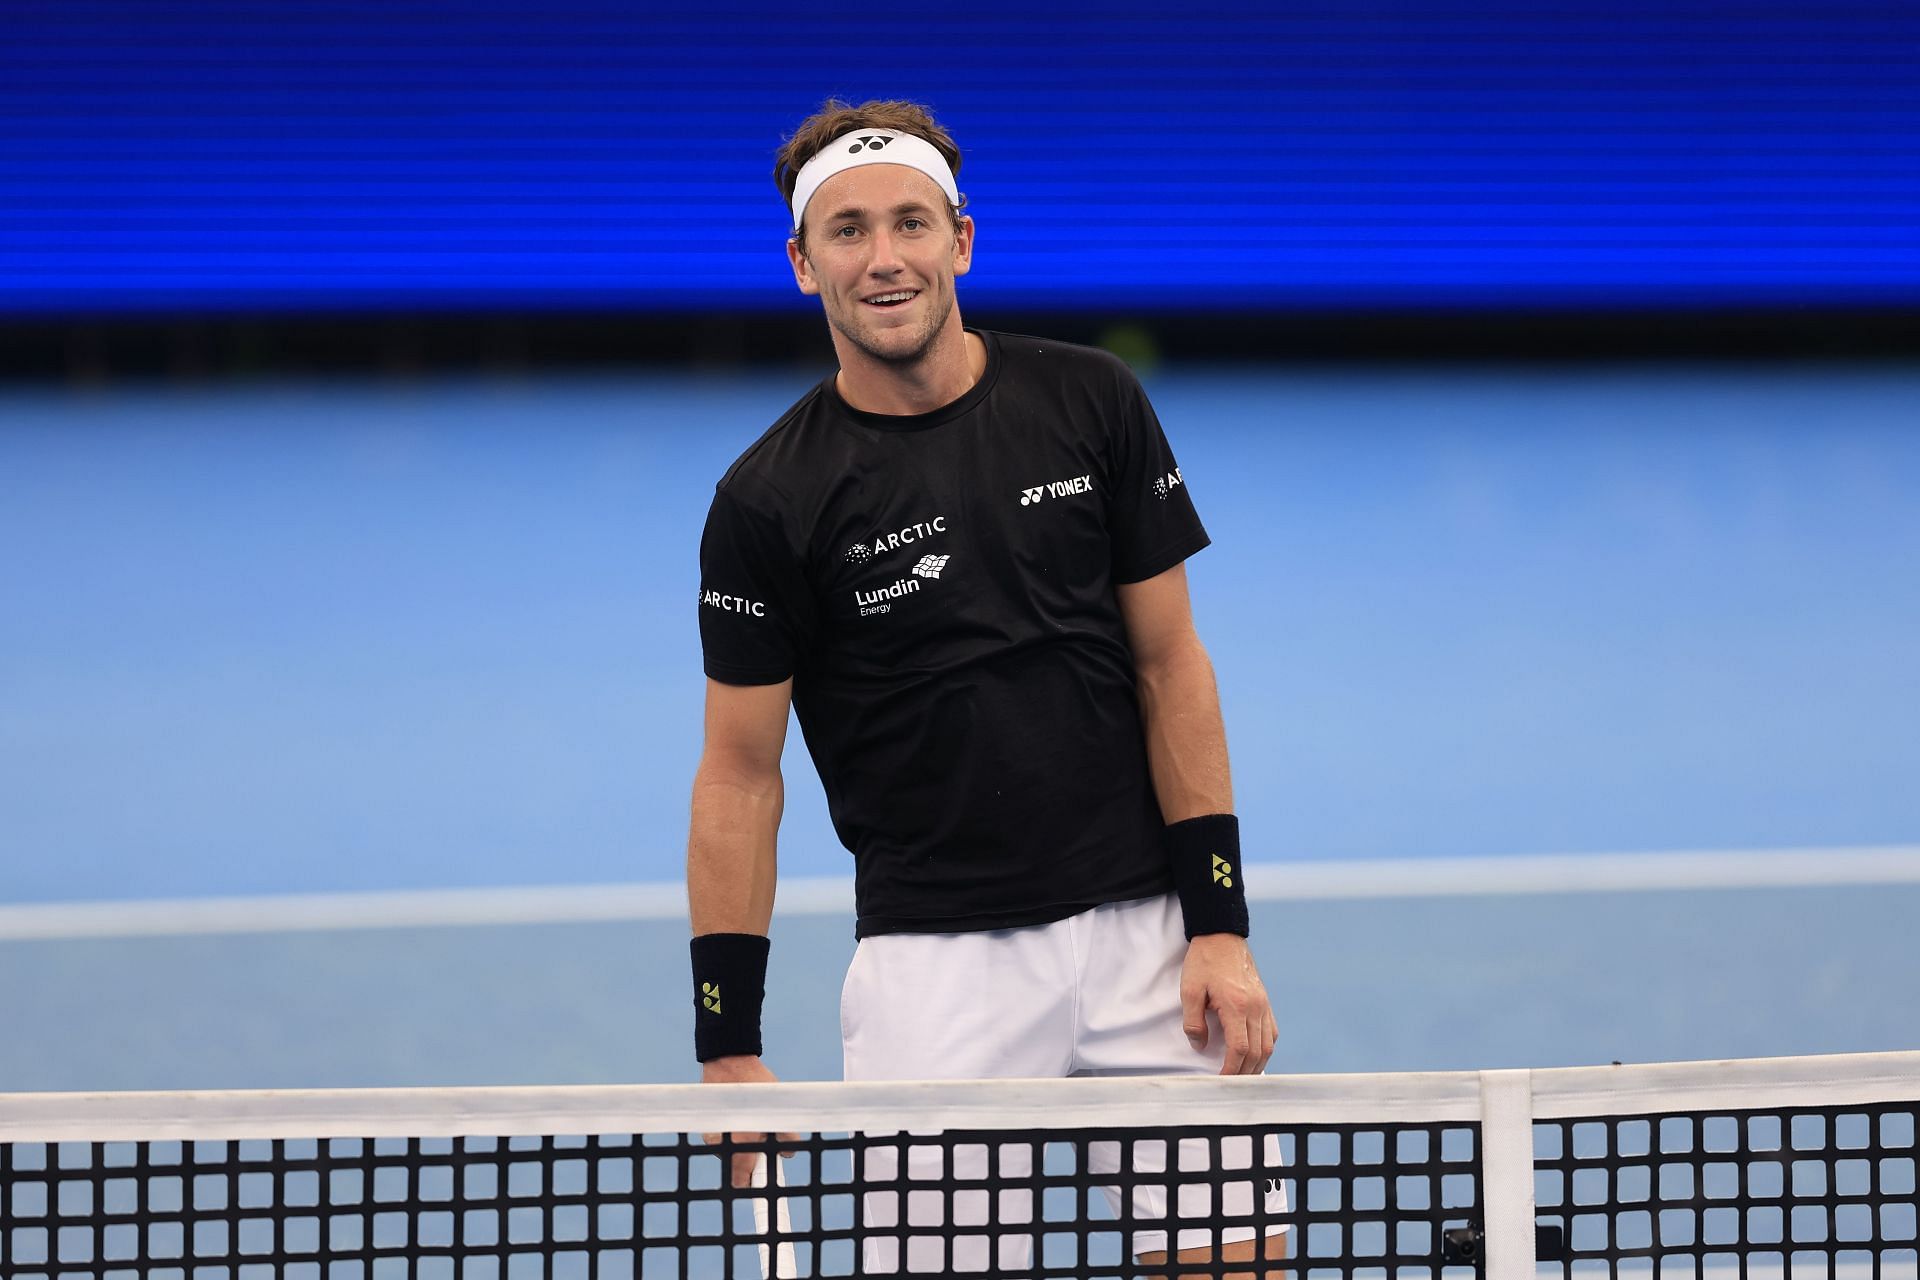 ATP Cup 2022 schedule today Day 5 TV schedule, start time, live stream details and more